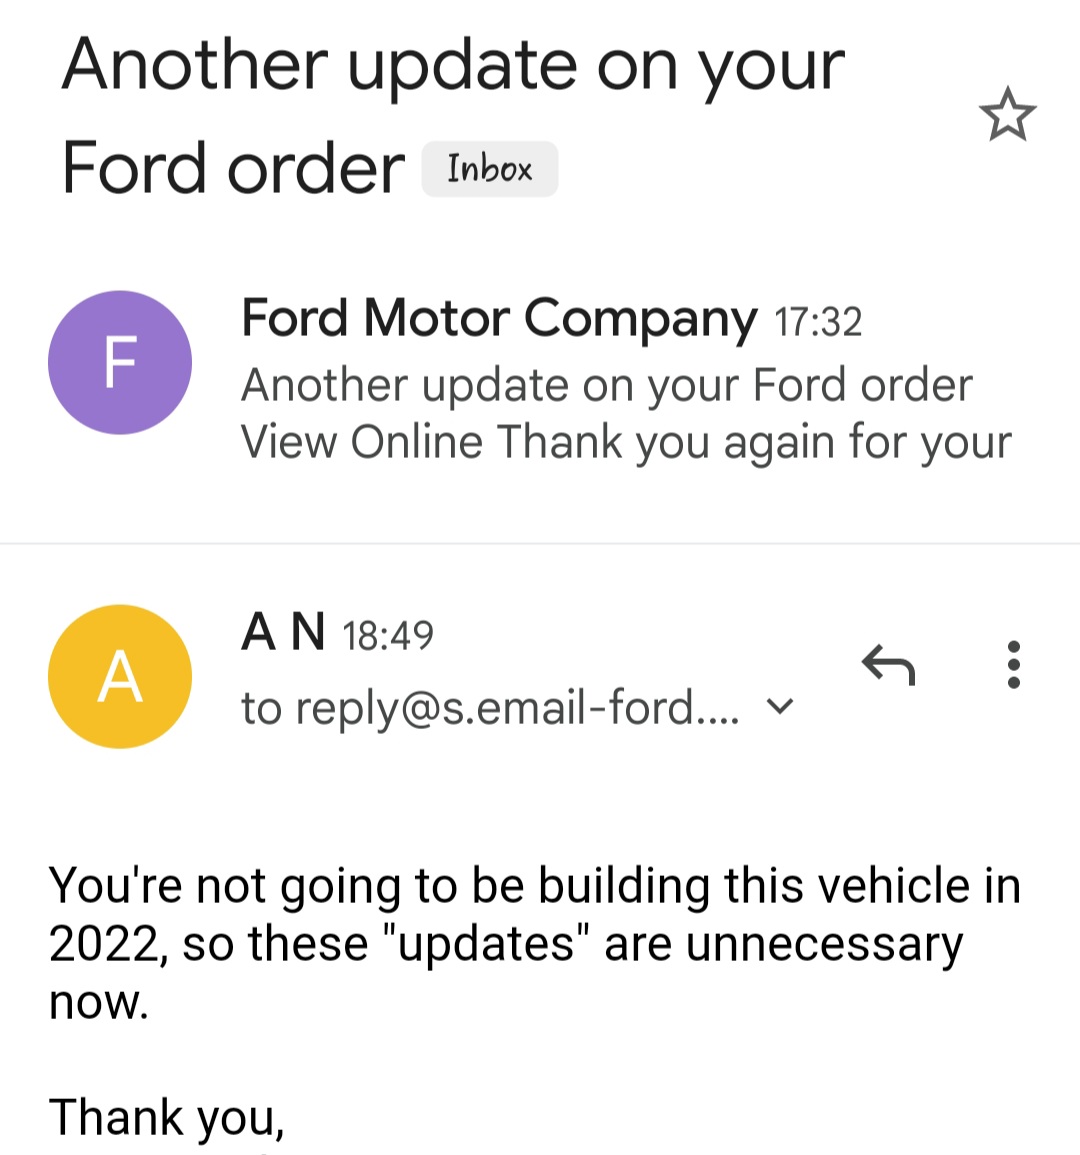 Ford Maverick New Email from Ford--"Another update on your Ford order" 20221003_211549